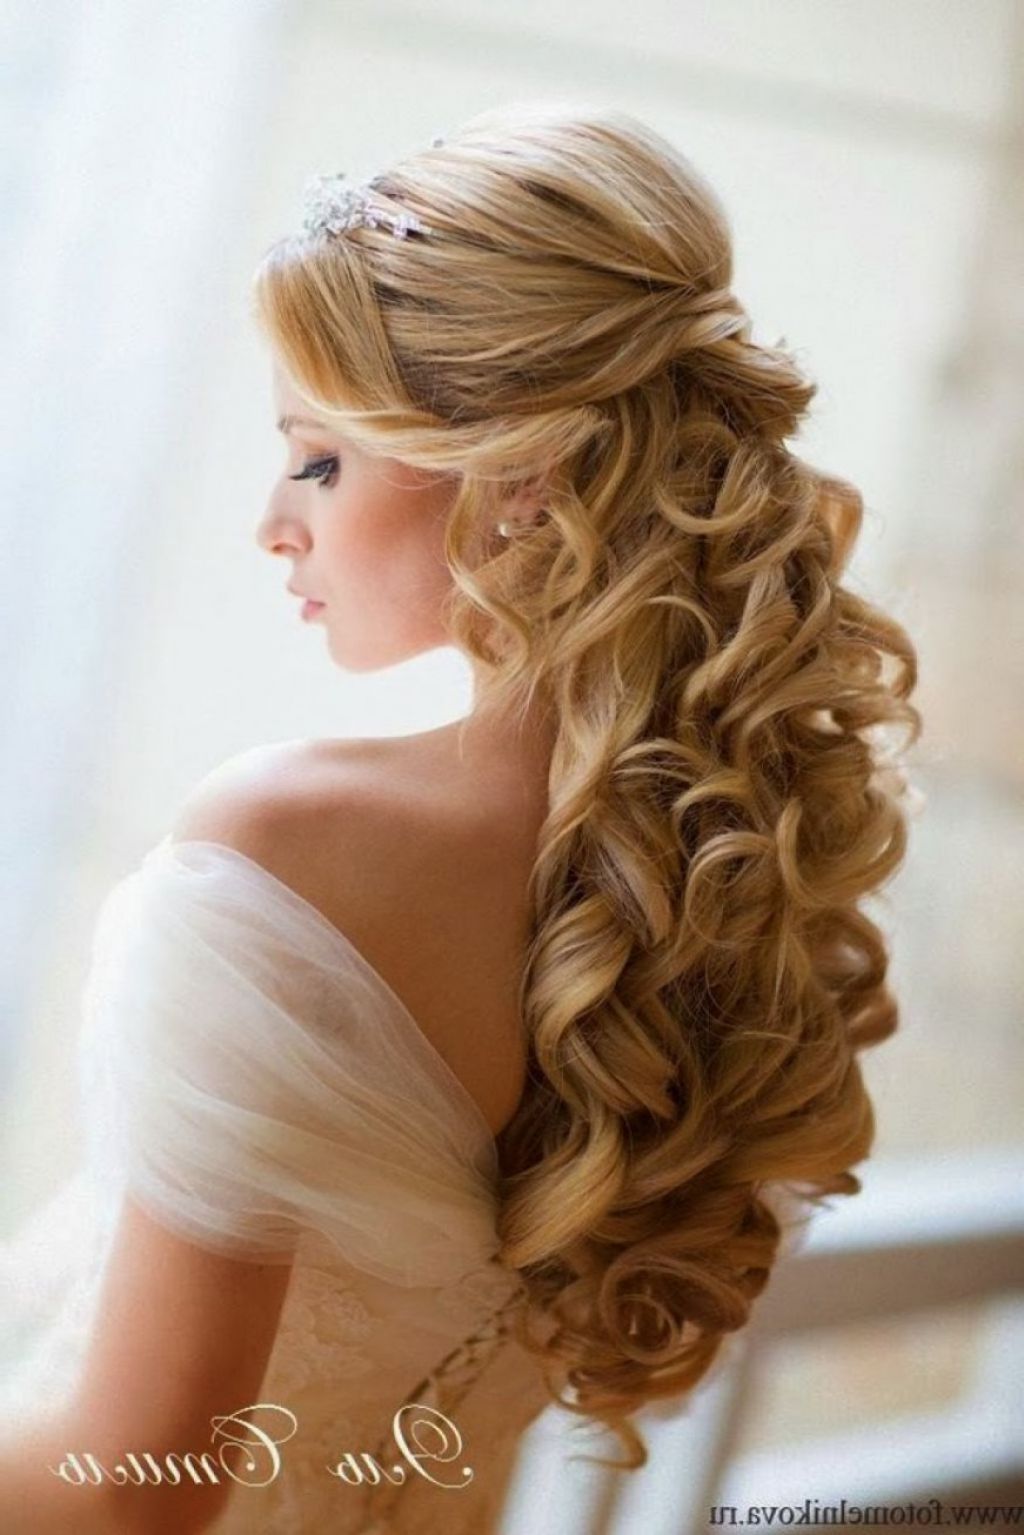 Fashionable Down Long Hair Wedding Hairstyles With √ 24+ Wonderful Wedding Hairstyles For Long Hair Down: Updos For (View 1 of 15)